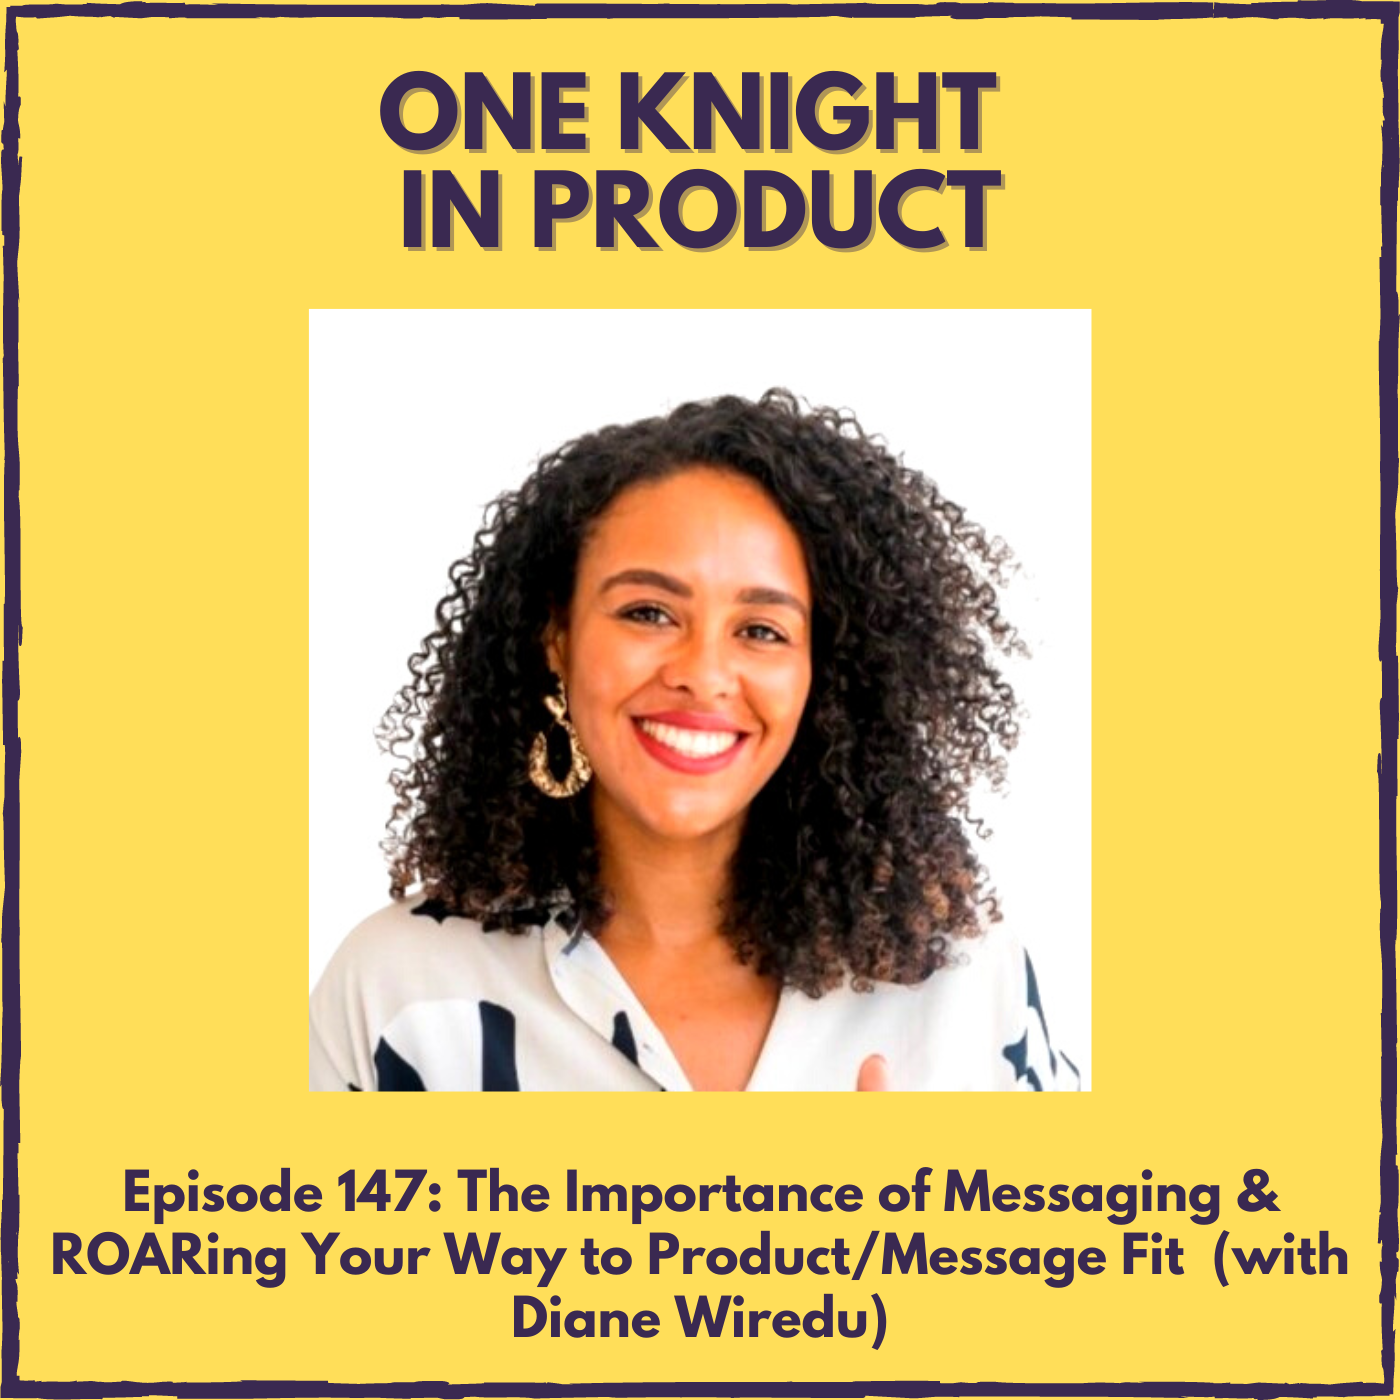 The Importance of Messaging & ROARing Your Way to Product/Message Fit (with Diane Wiredu, Founder & Messaging Strategist @ Lion Words)